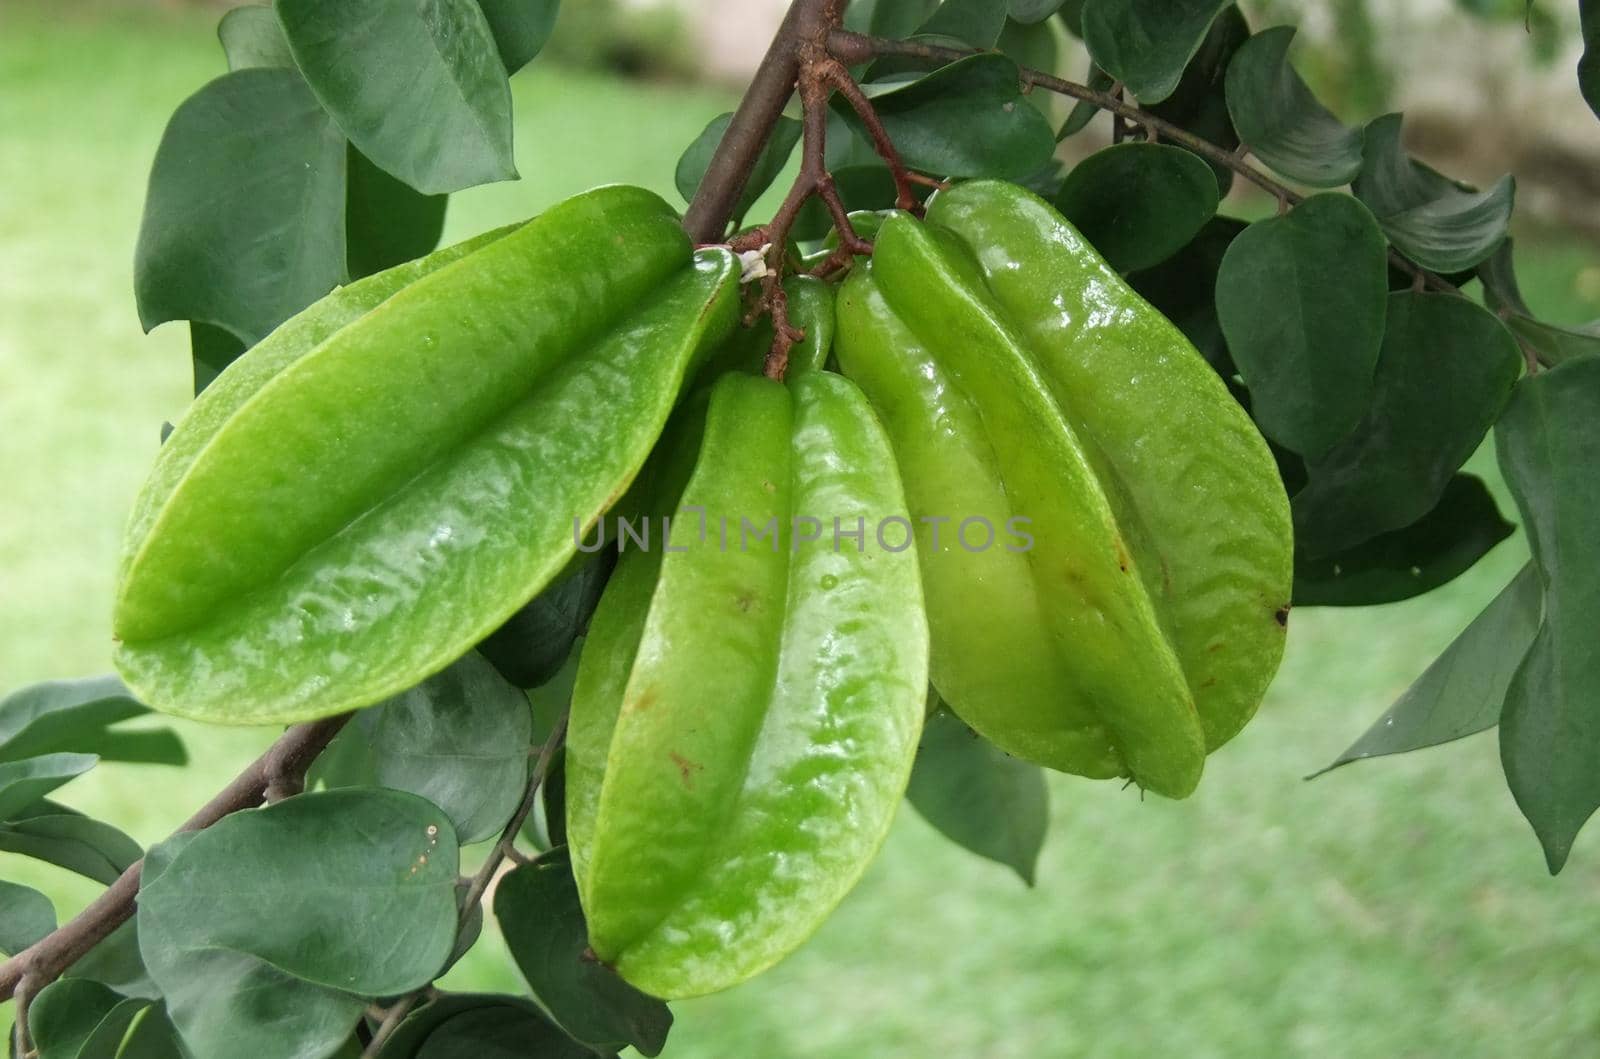 conde, bahia / brazil - april 28, 2011: Carambola fruit is used in the manufacture of juices, ice cream, sweets and drink.